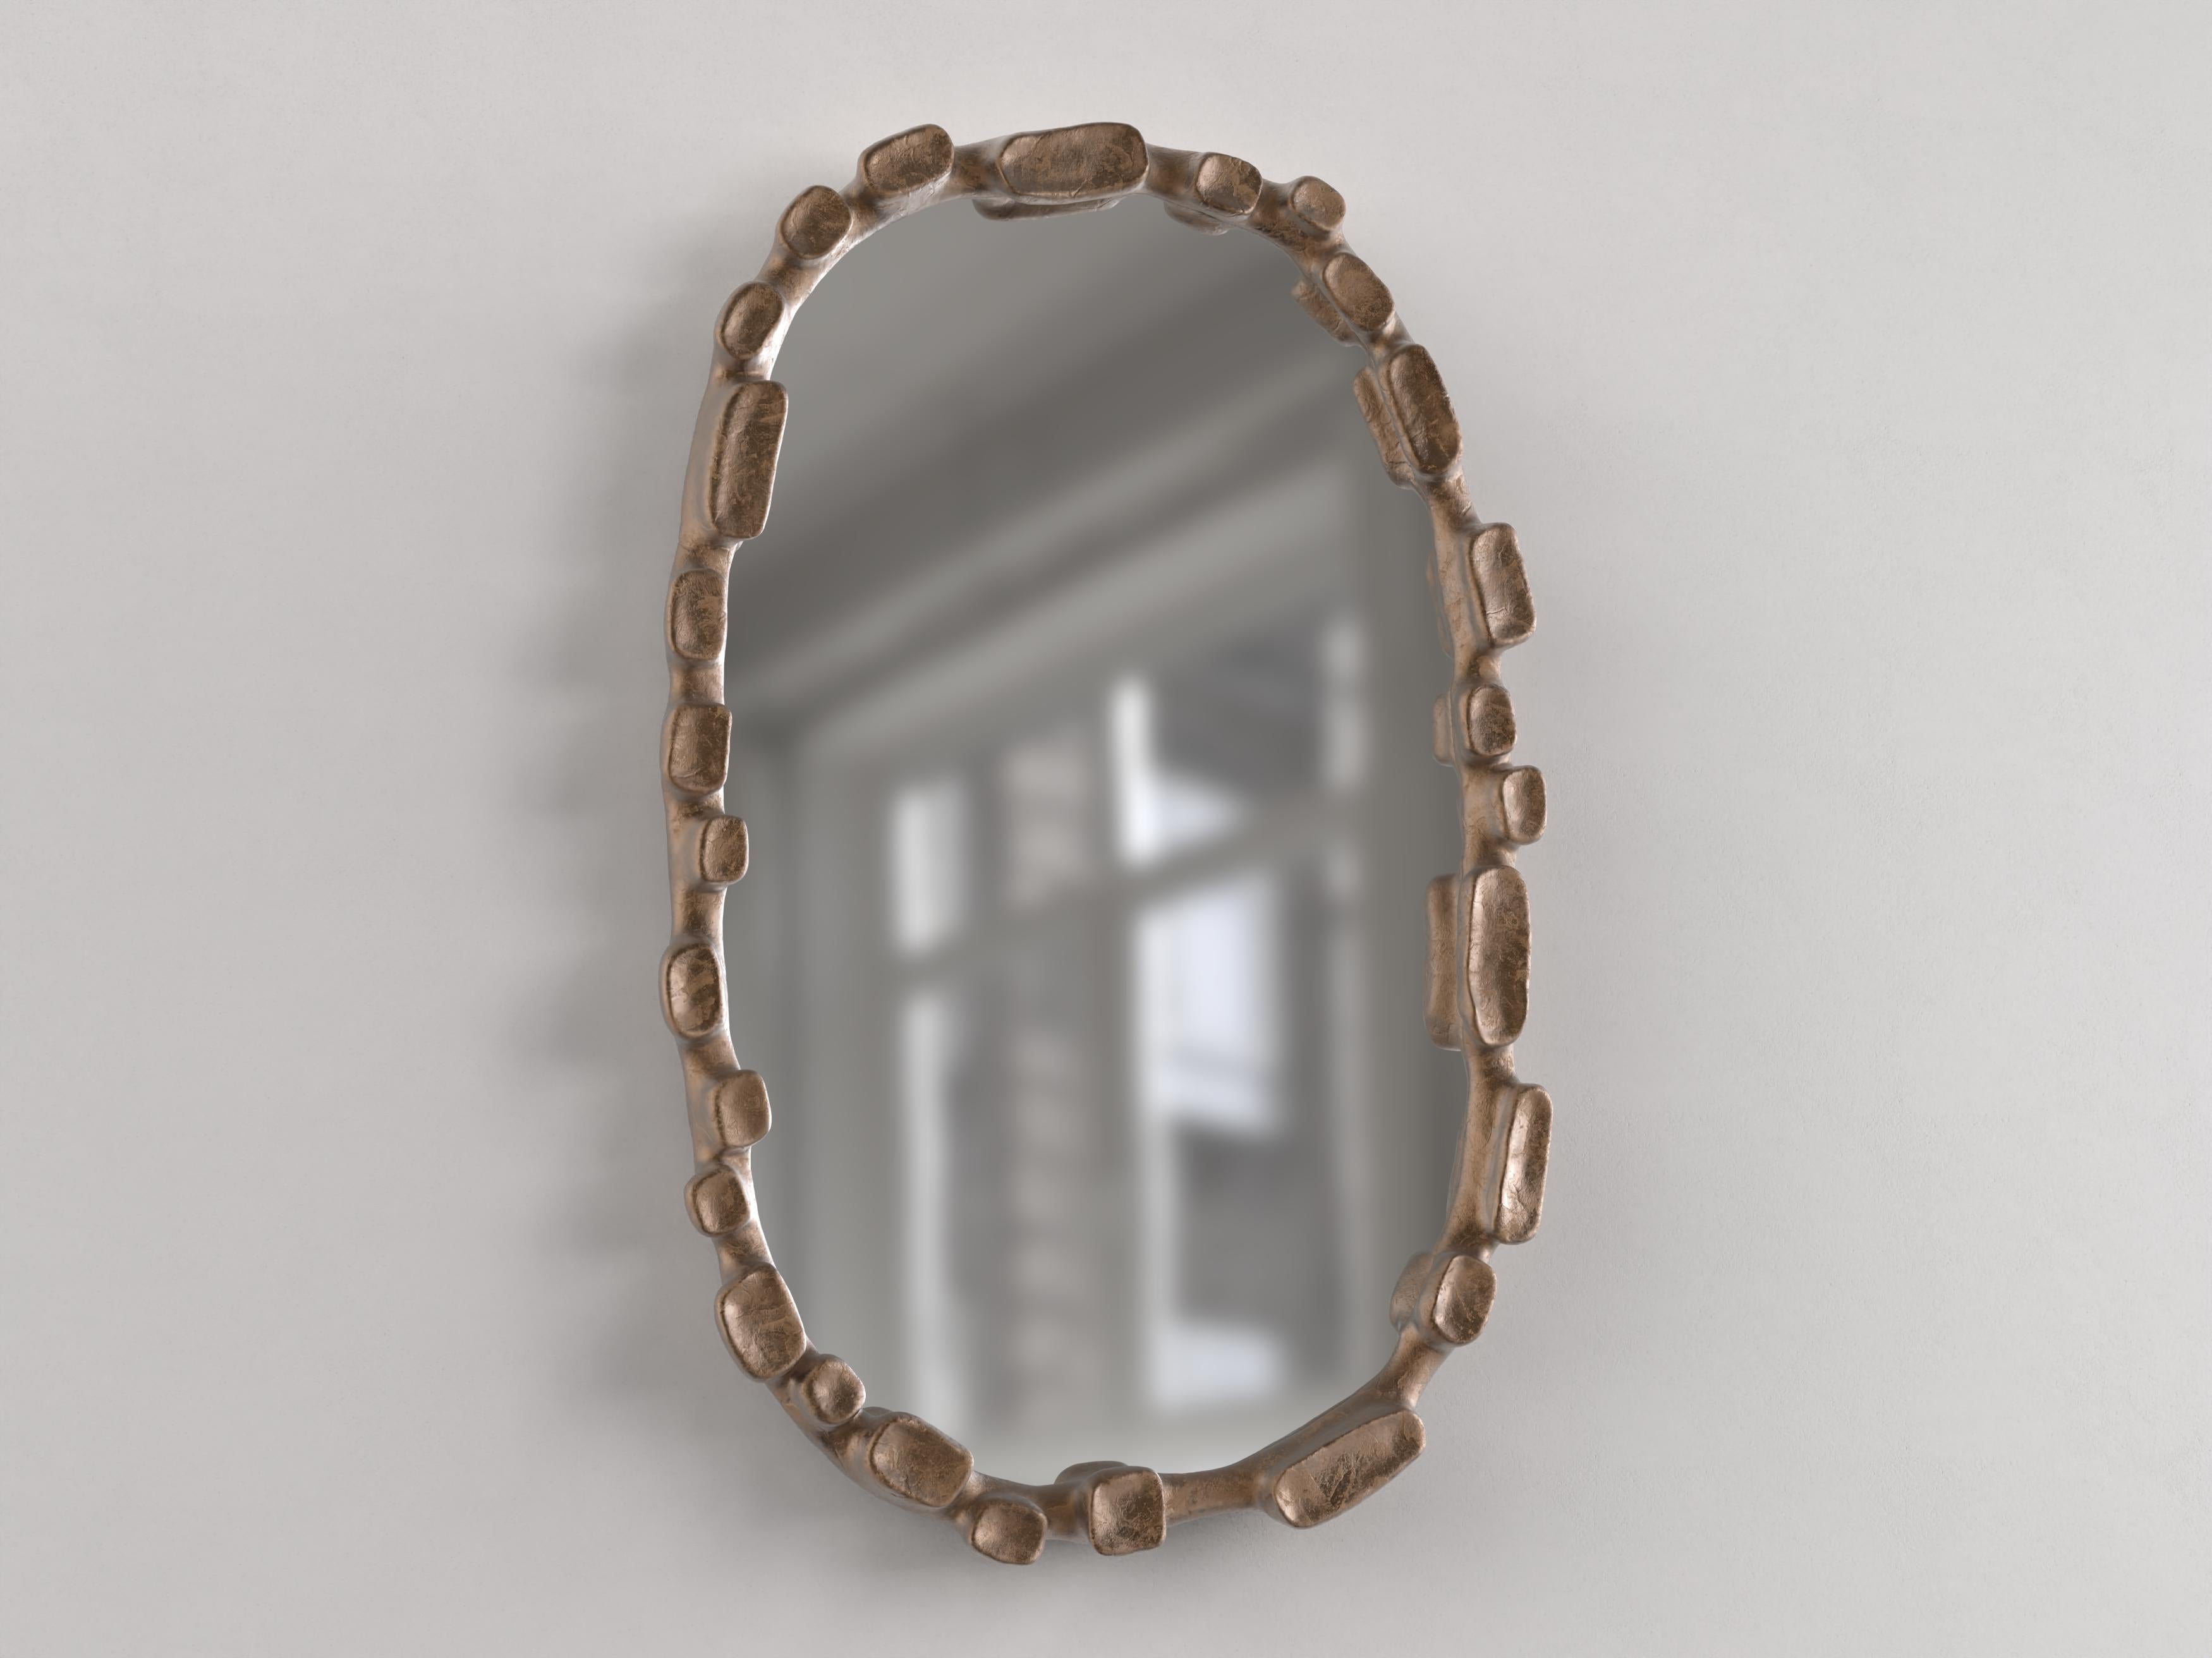 Mare V2 Wall Mirror by Edizione Limitata
Limited edition of 15+3. Signed and numbered.
Dimensions: D 6 x W 60 x H 124 cm
Materials: Bronze and mirror.

Edizione Limitata, that is to say “Limited Edition”, is a brand promoting and developing objects